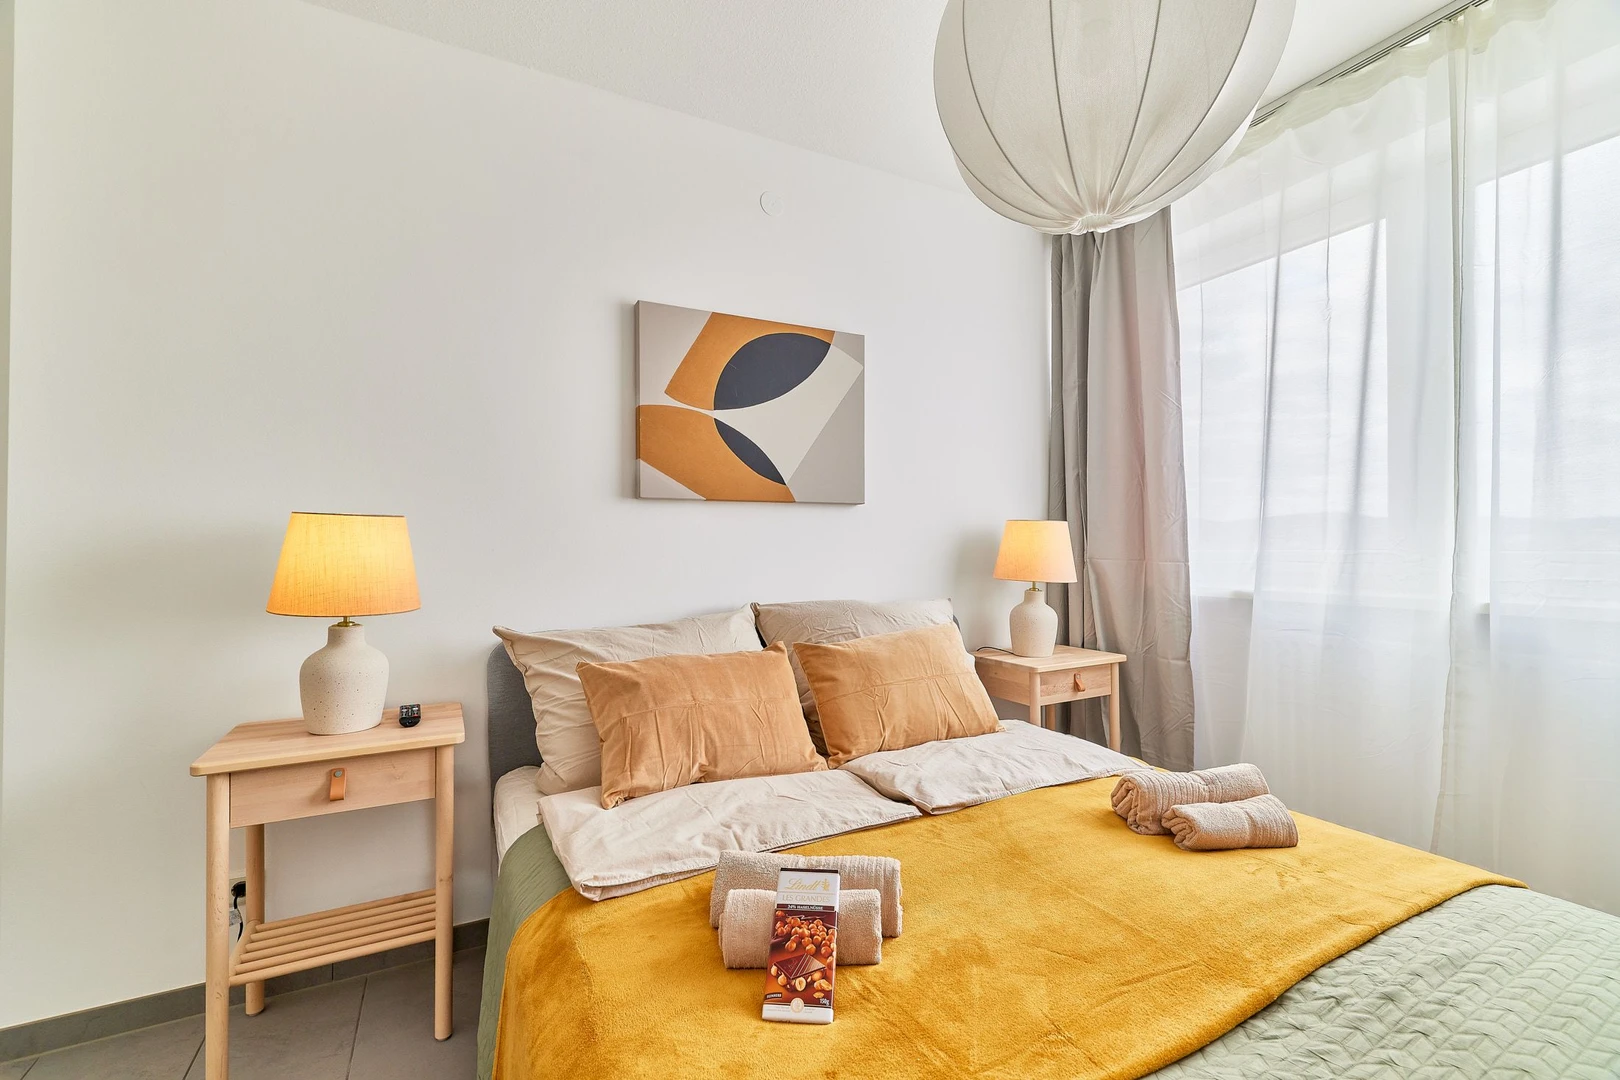 Renting rooms by the month in Kaiserslautern